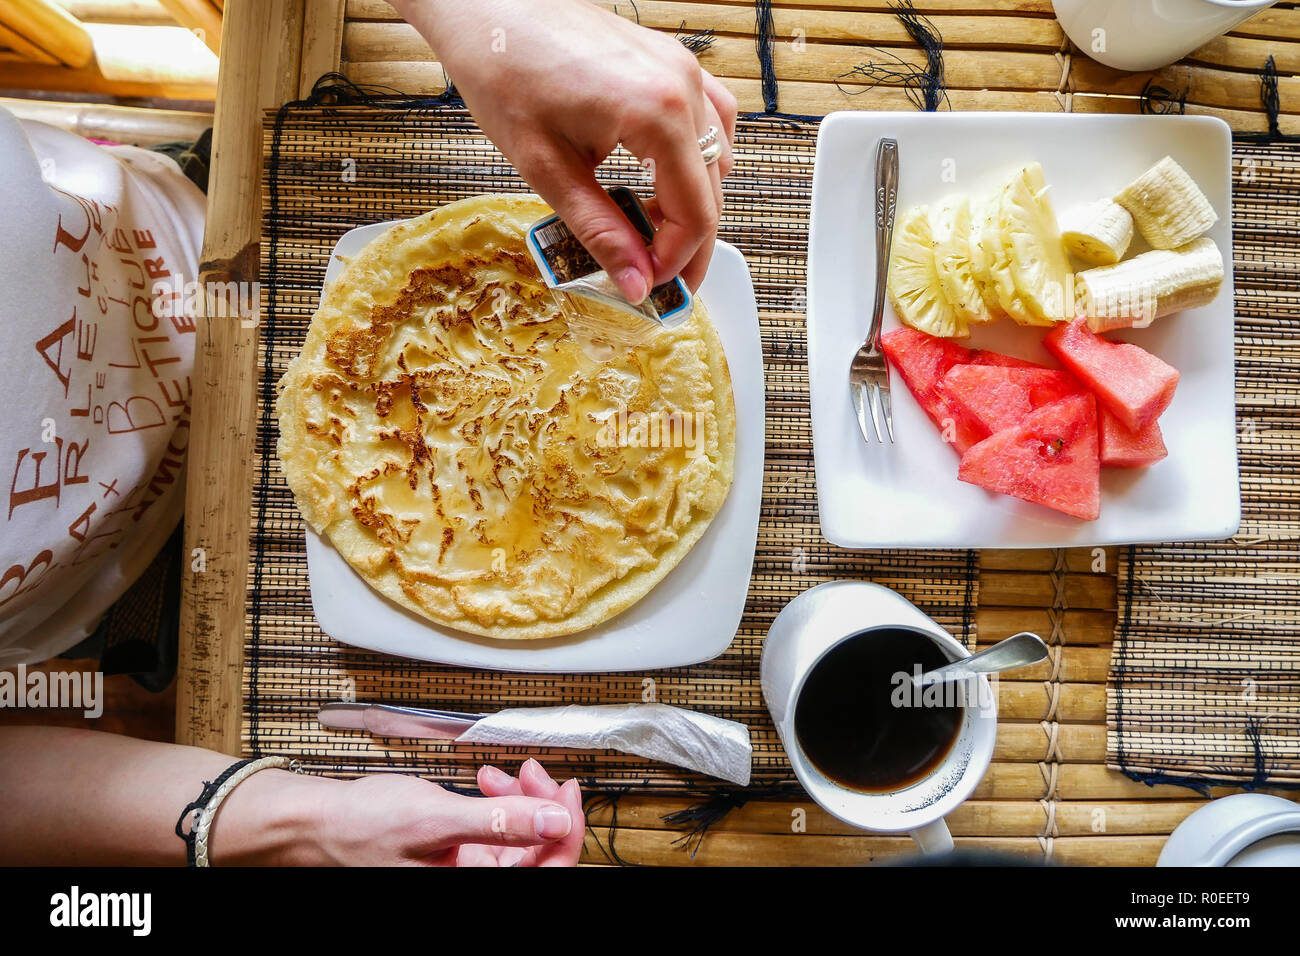 A breakfast in a hotel in Indonesia. Stock Photo